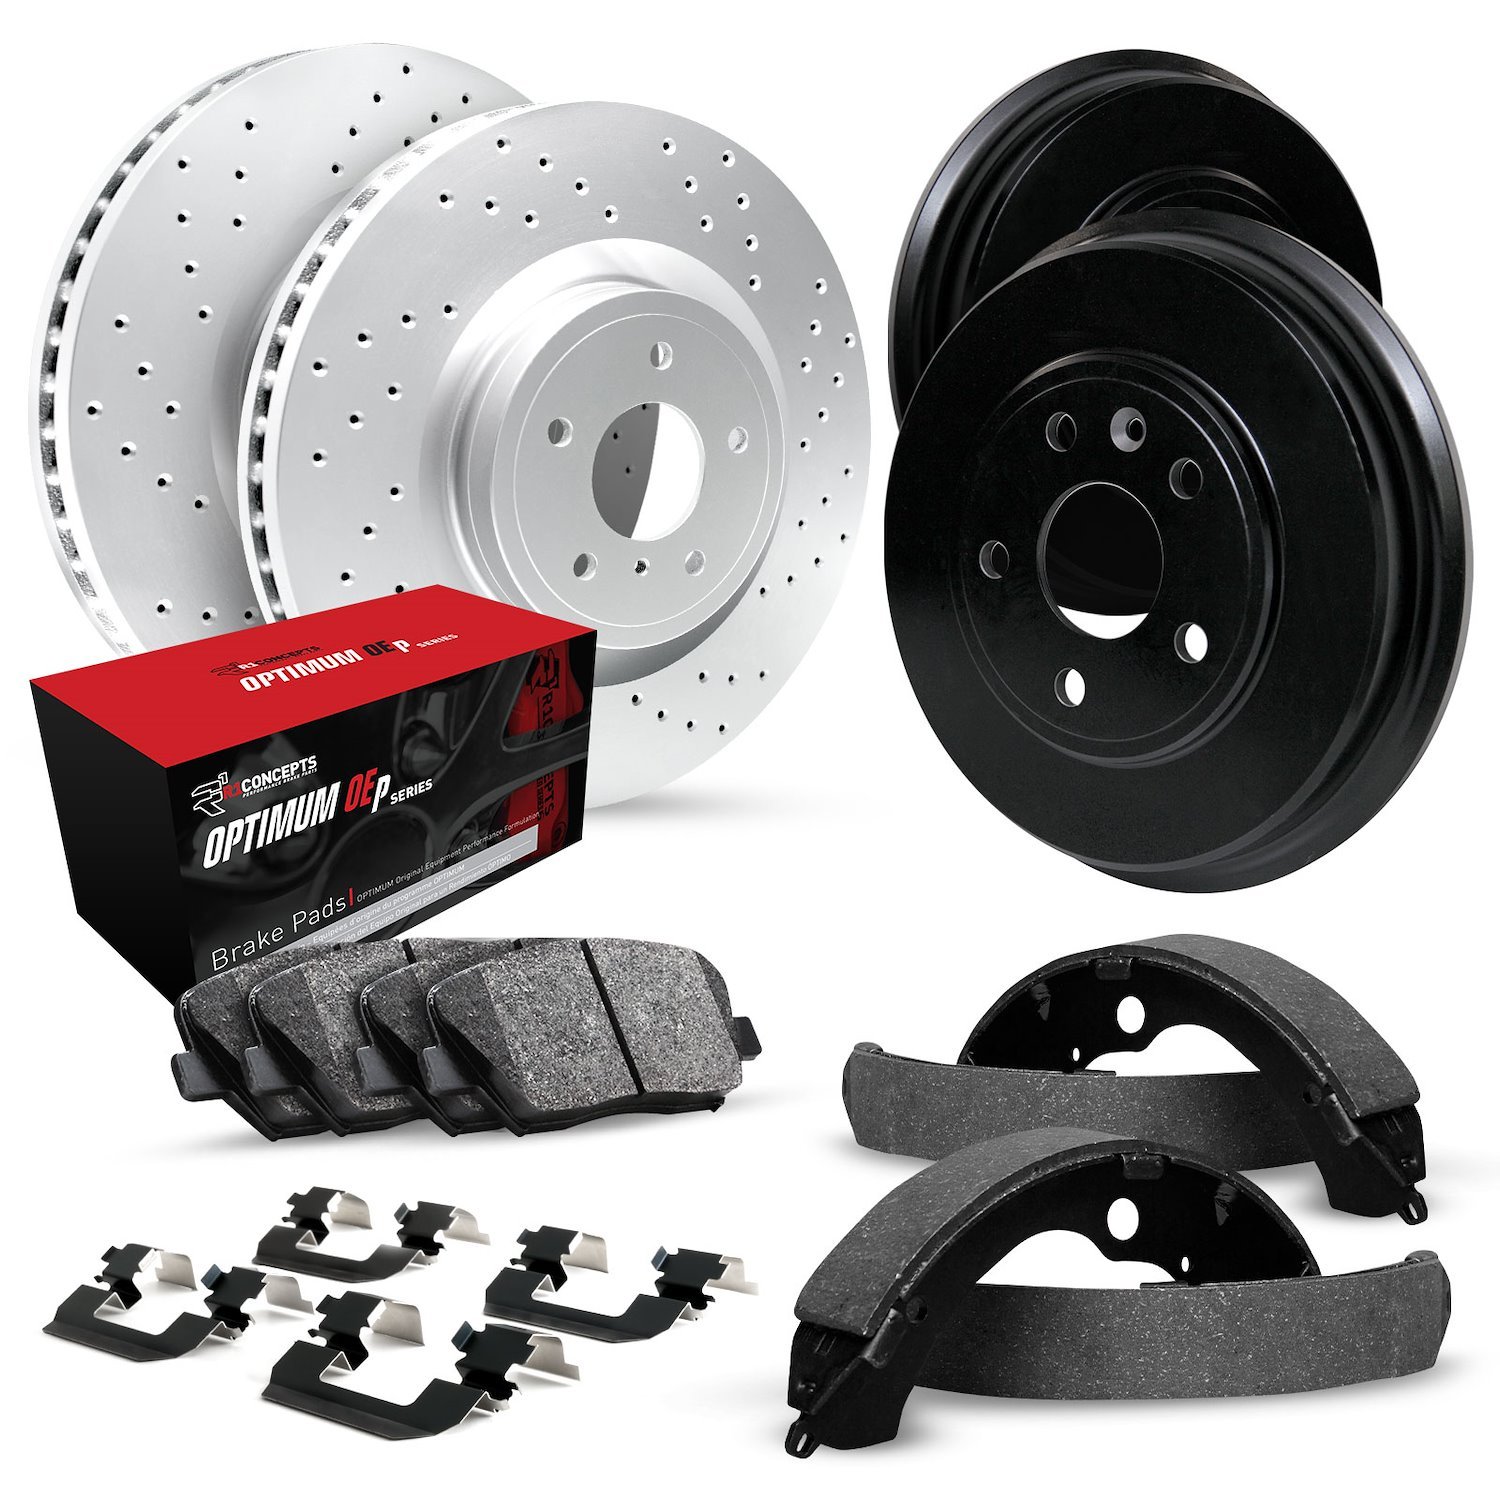 GEO-Carbon Drilled Brake Rotor & Drum Set w/Optimum OE Pads, Shoes, & Hardware, 1971-1972 GM, Position: Front & Rear